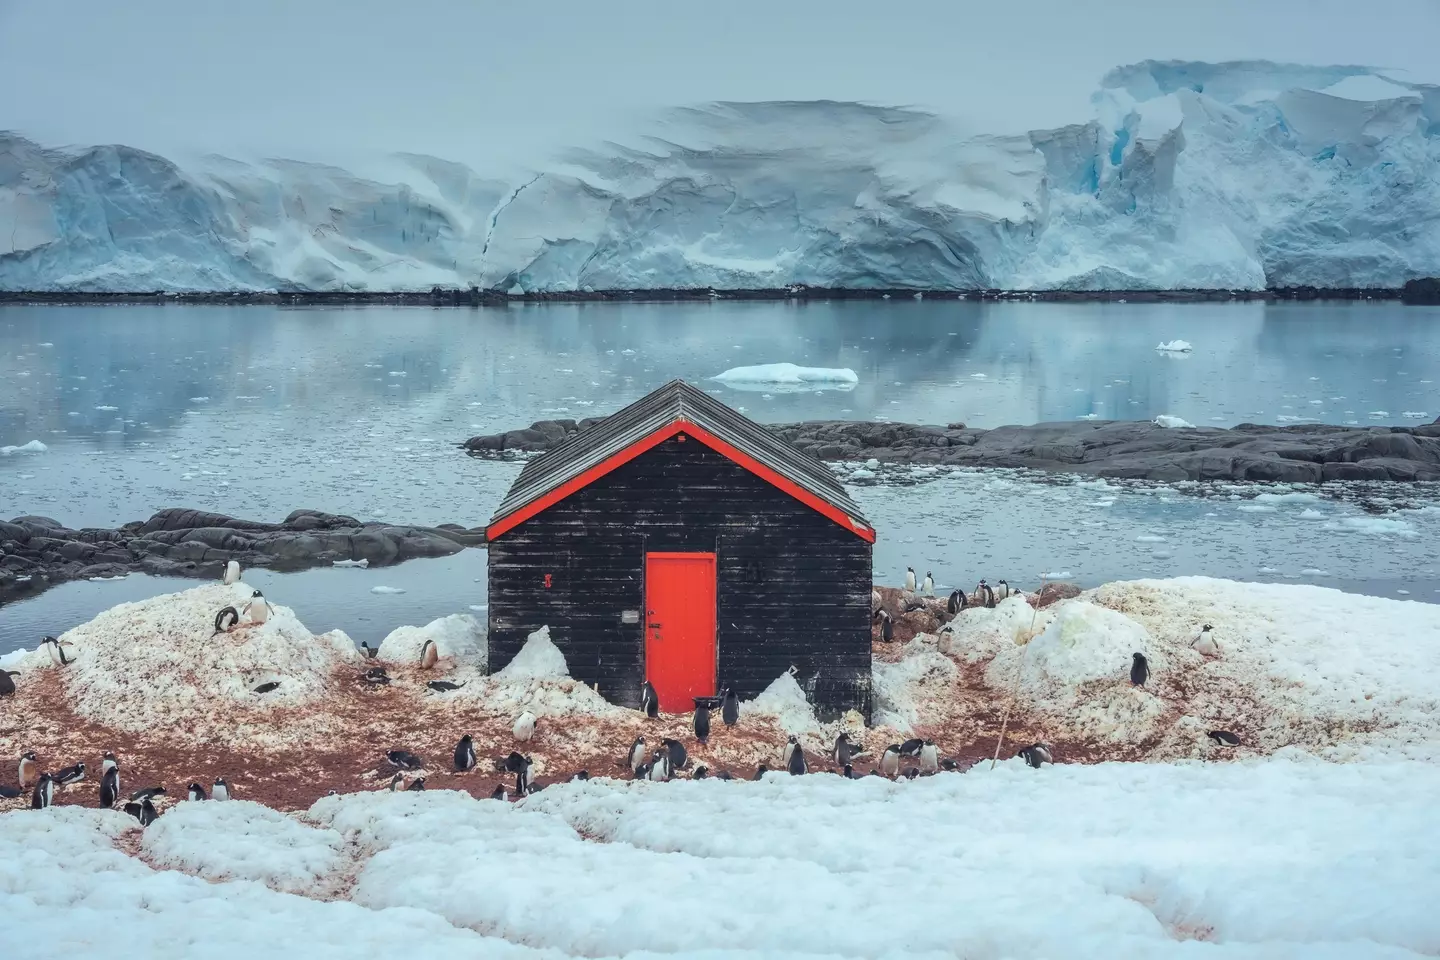 The 'Penguin Post Office' is located in Port Lockroy in the continent of Antarctica.